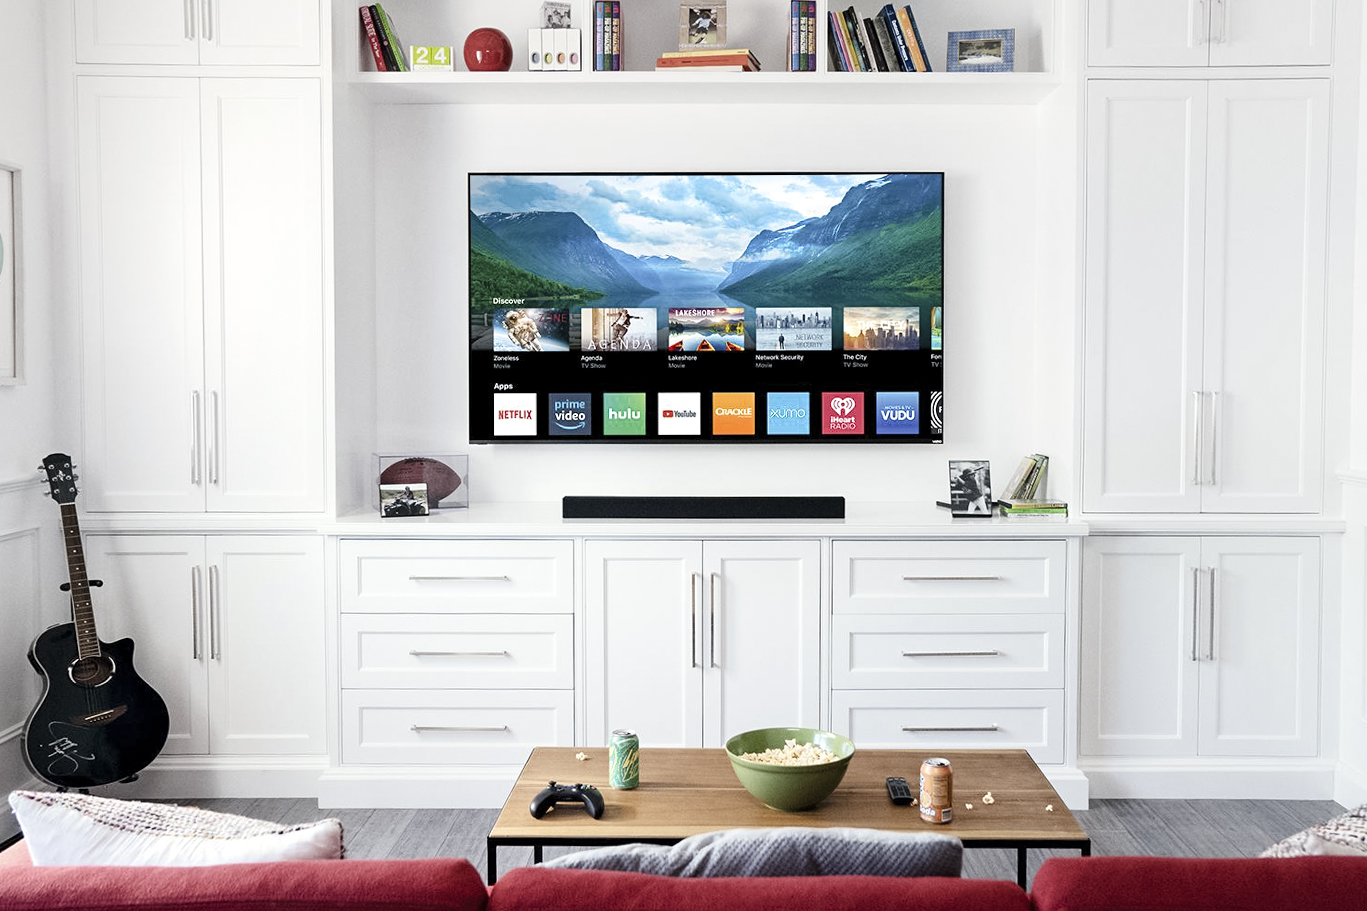 A wall-mounted Vizio TV in a white room.